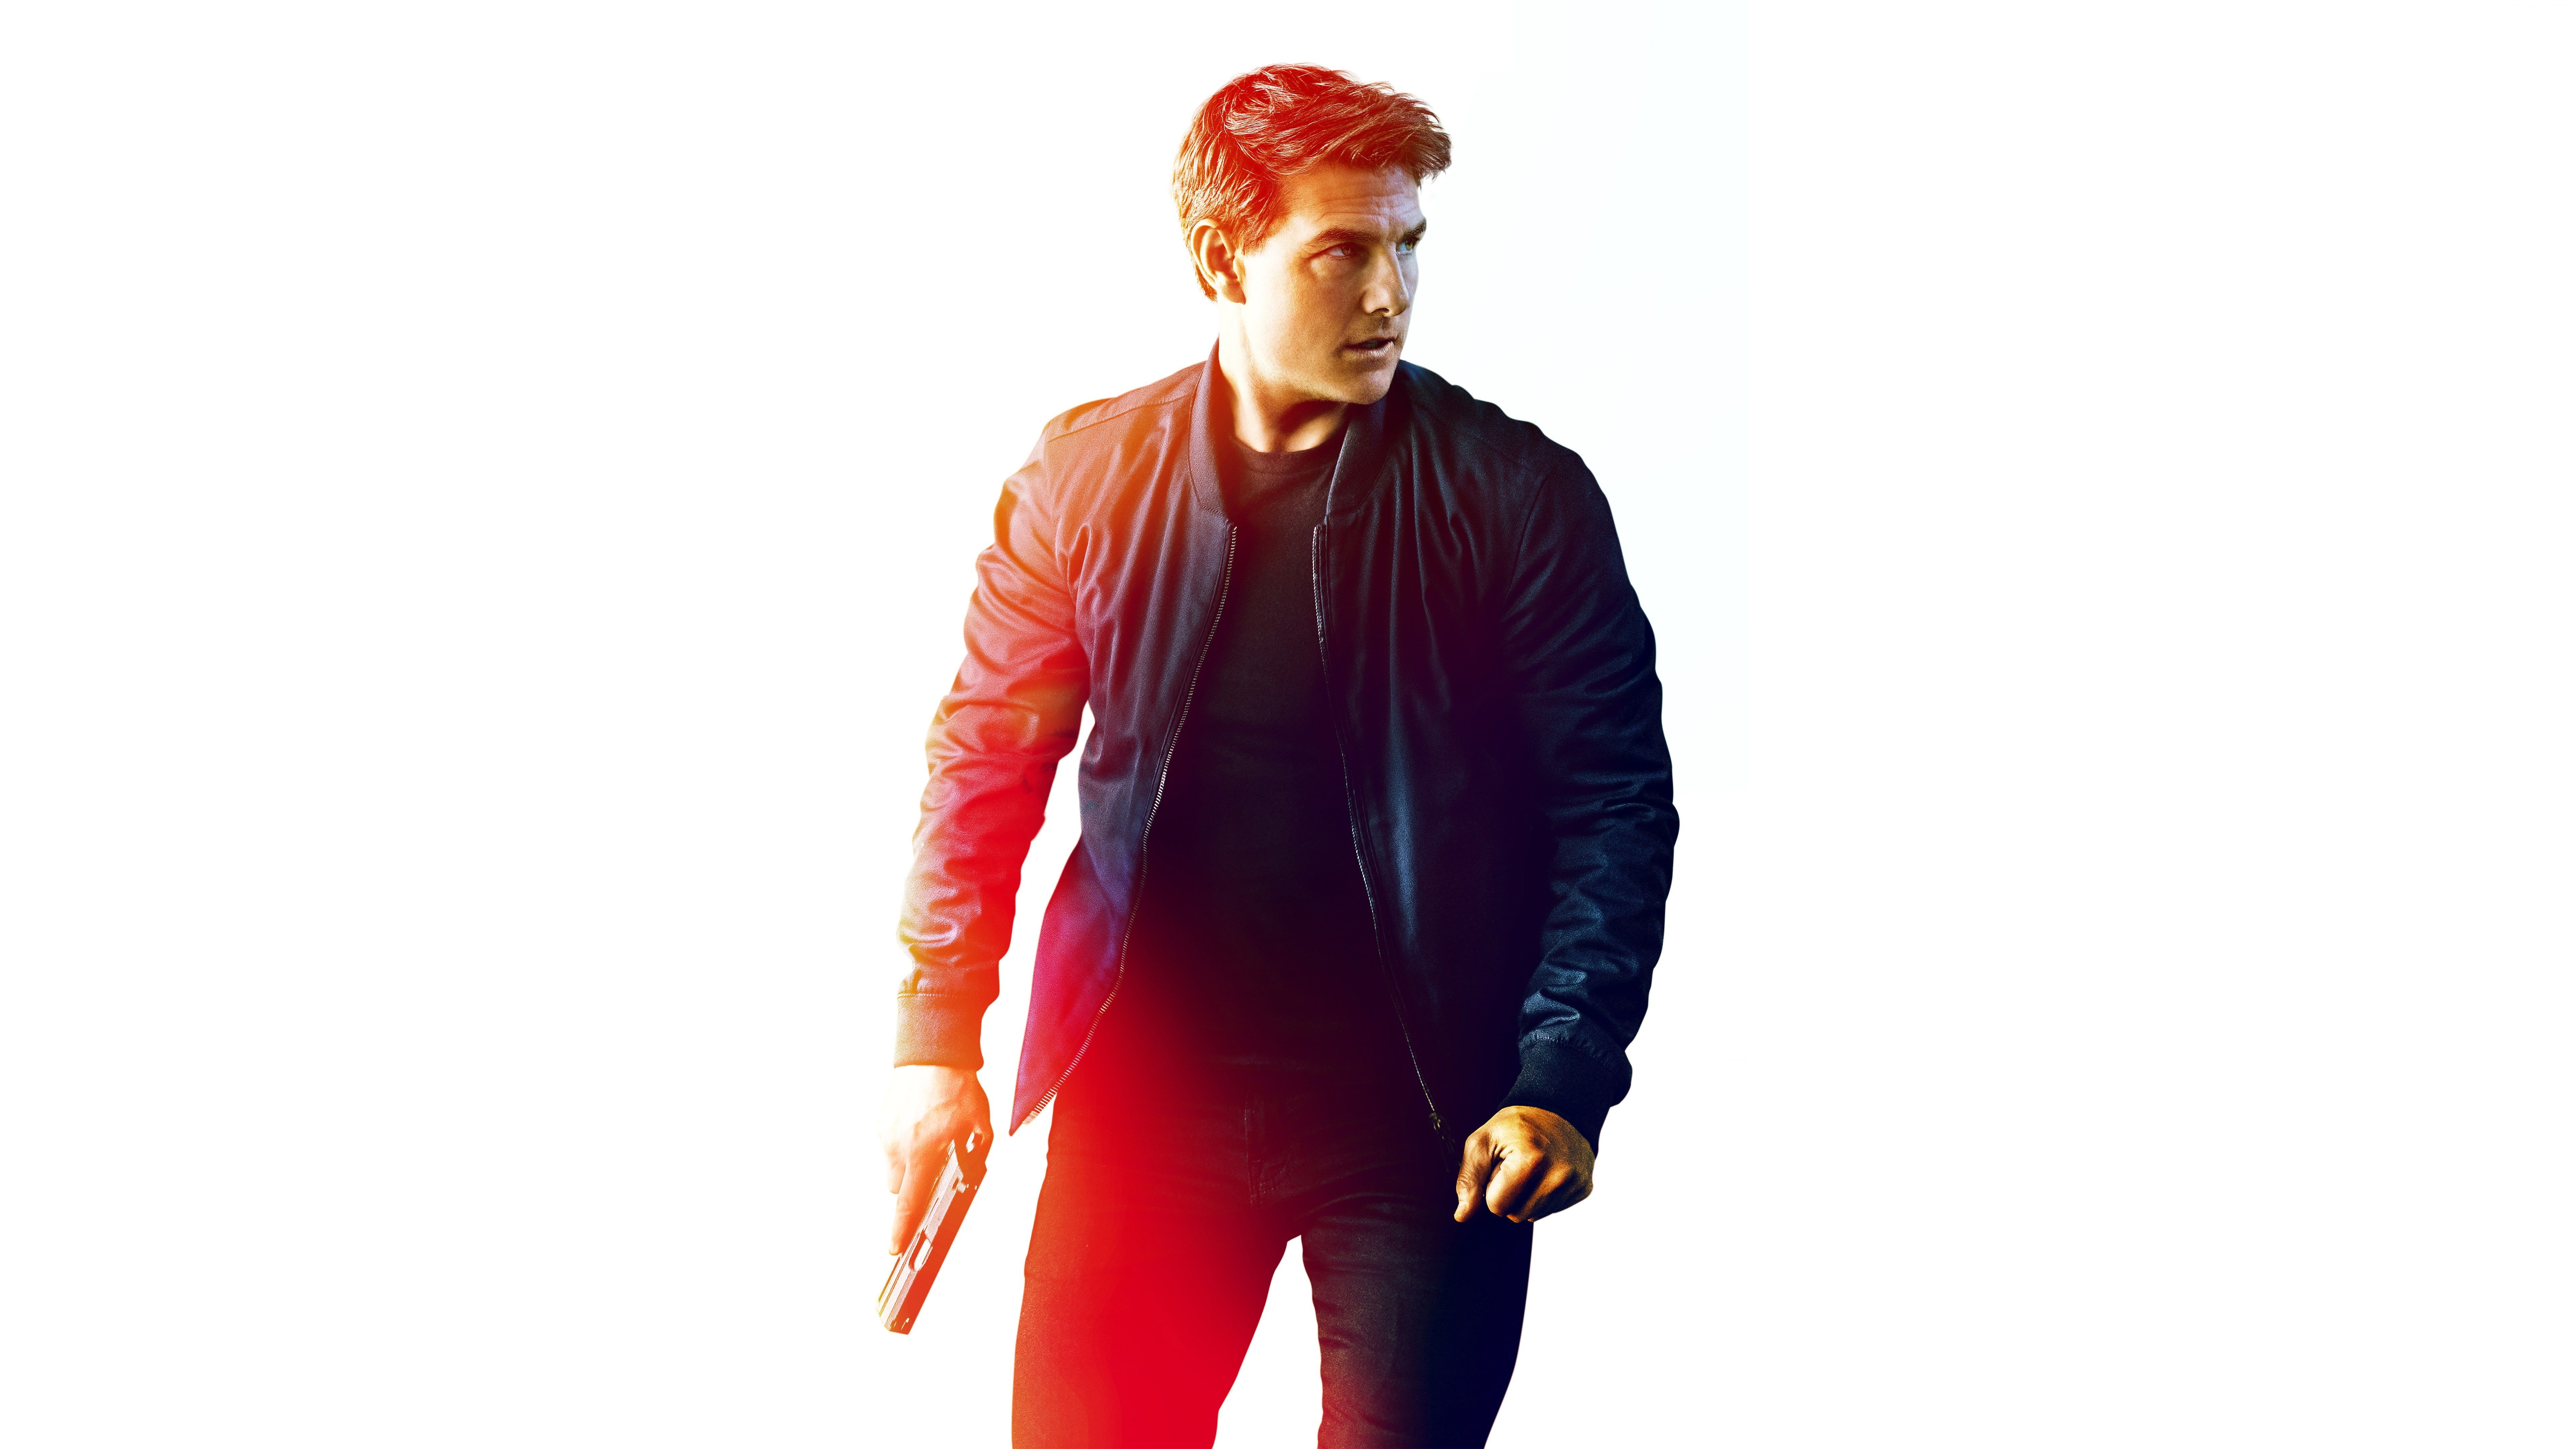 4K Tom Cruise Mission: Impossible K #wallpaper #hdwallpaper #desktop. Mission impossible fallout, Tom cruise, Mission impossible